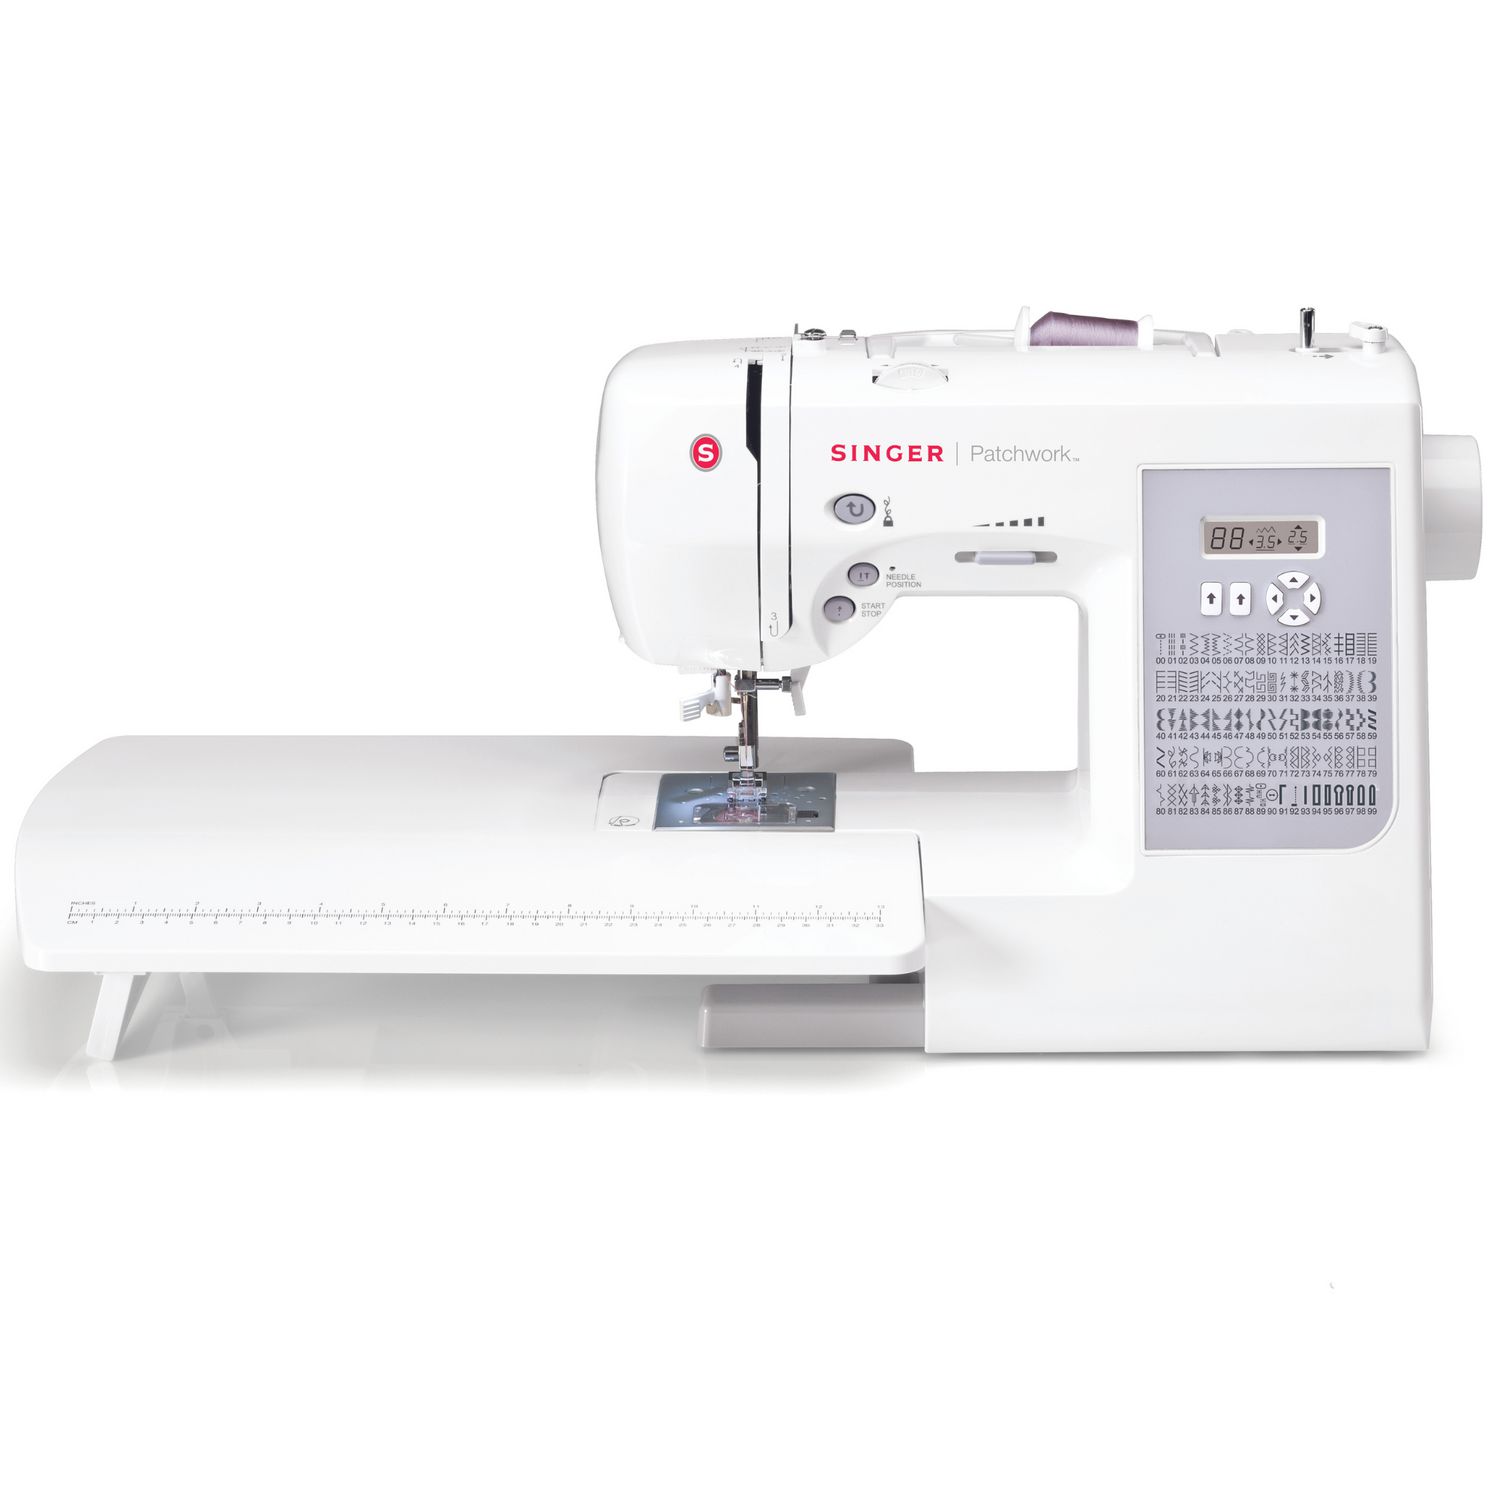 SINGER® 7285Q Patchwork™ Computerized Sewing & Quilting Machine 